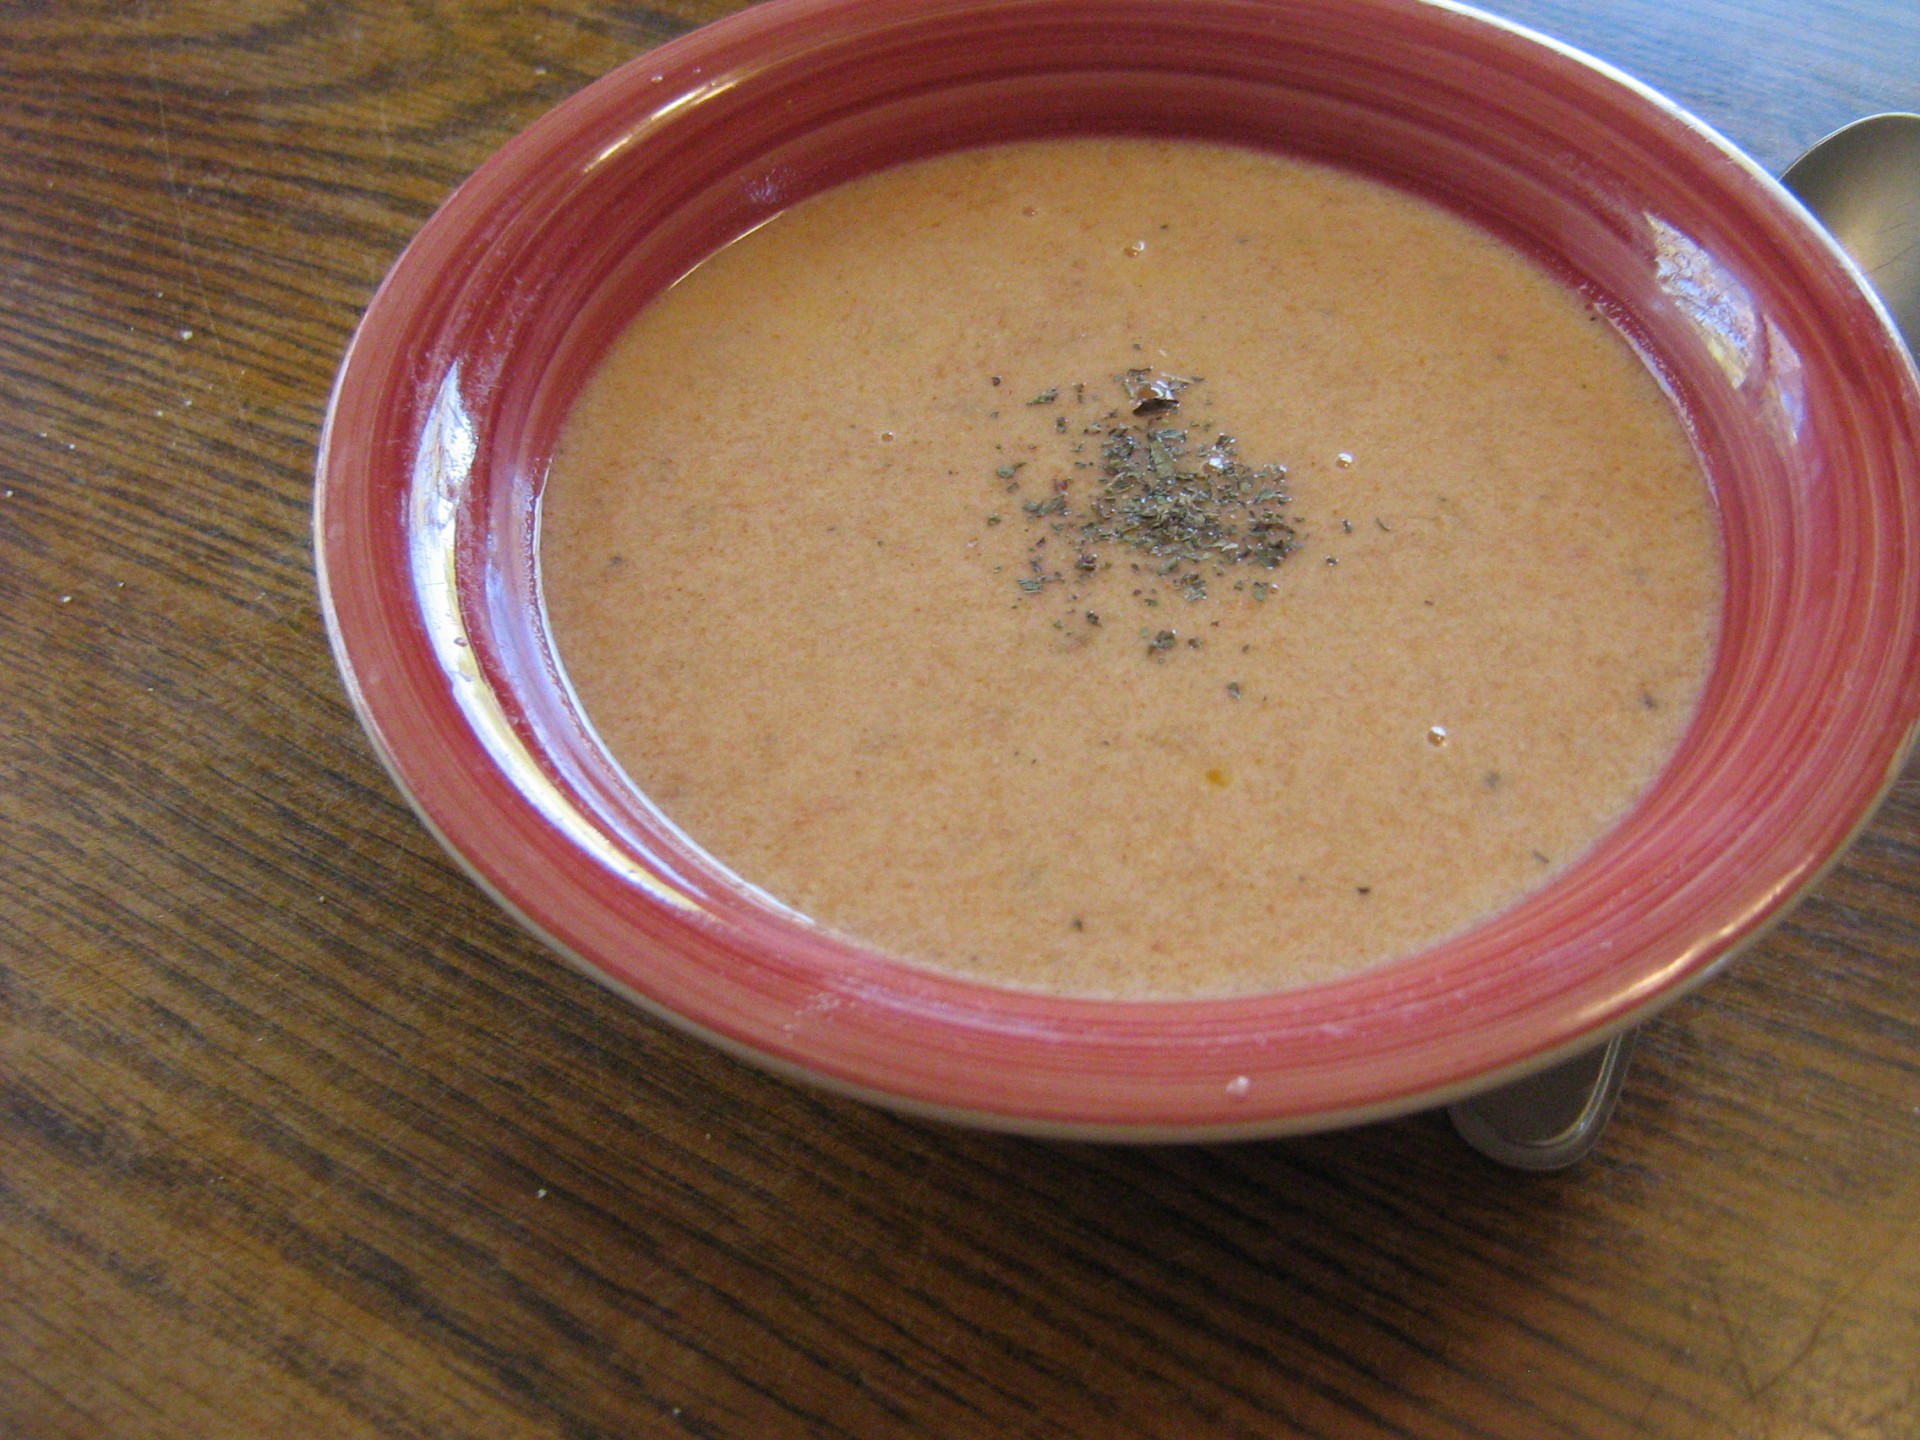 Flash-In-The-Pan Zesty Tomato Soup